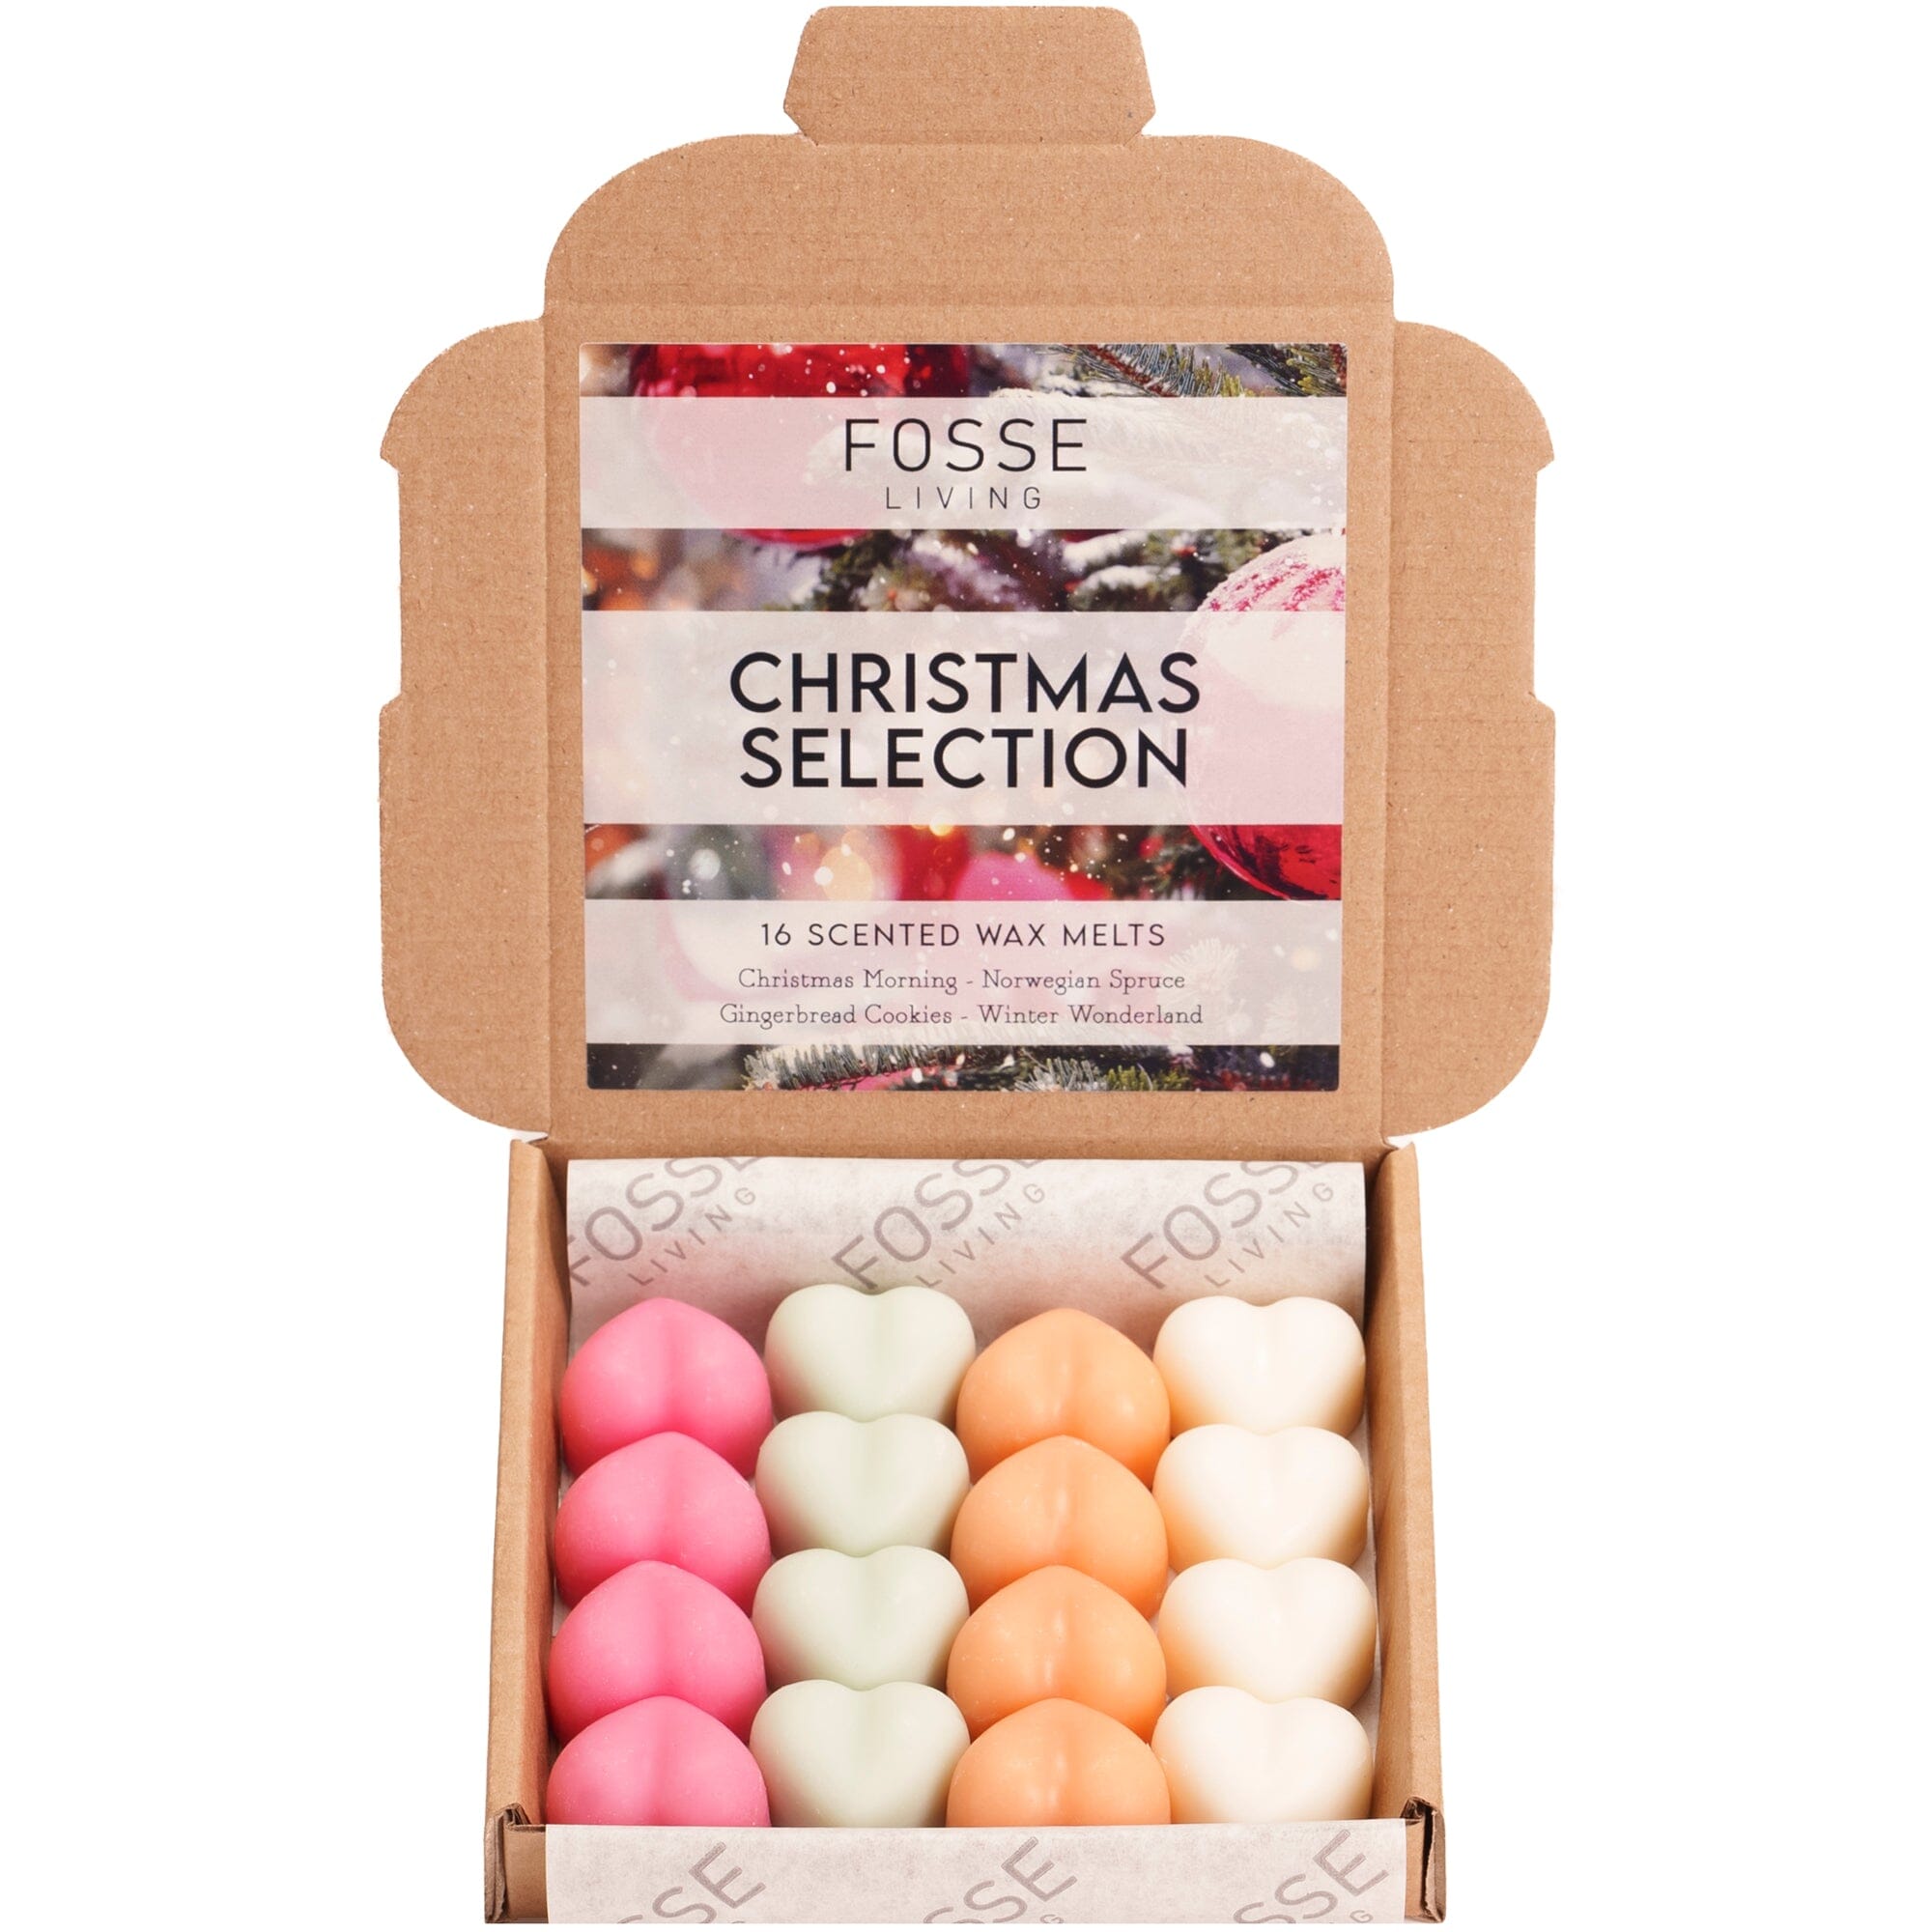 Christmas Selection Highly Scented Soy Wax Melts - 16 Pack Fosse Living 